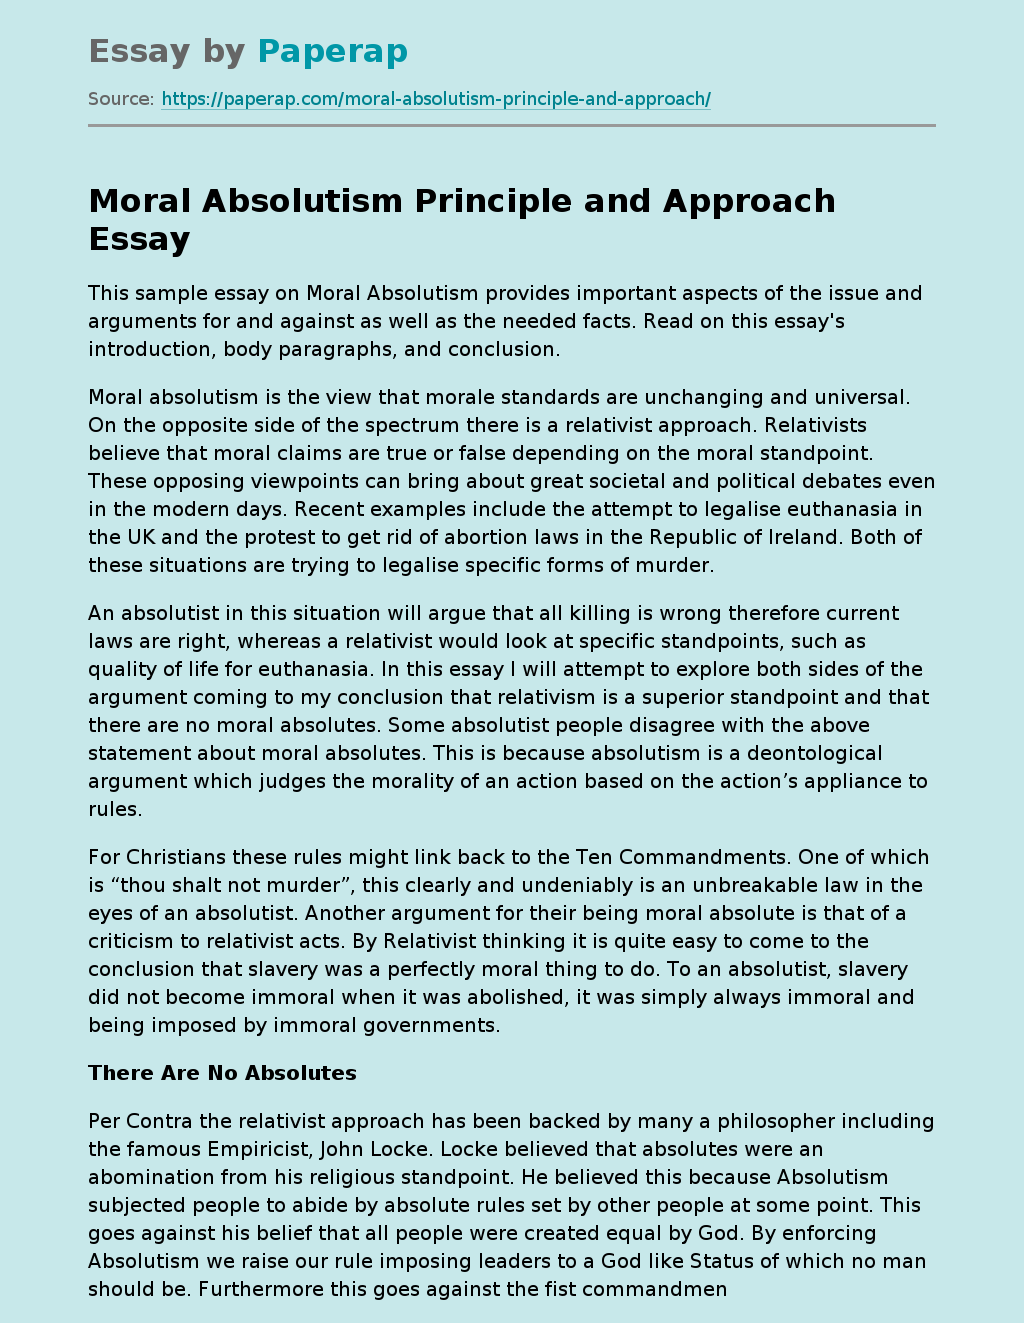 Moral Absolutism Principle and Approach